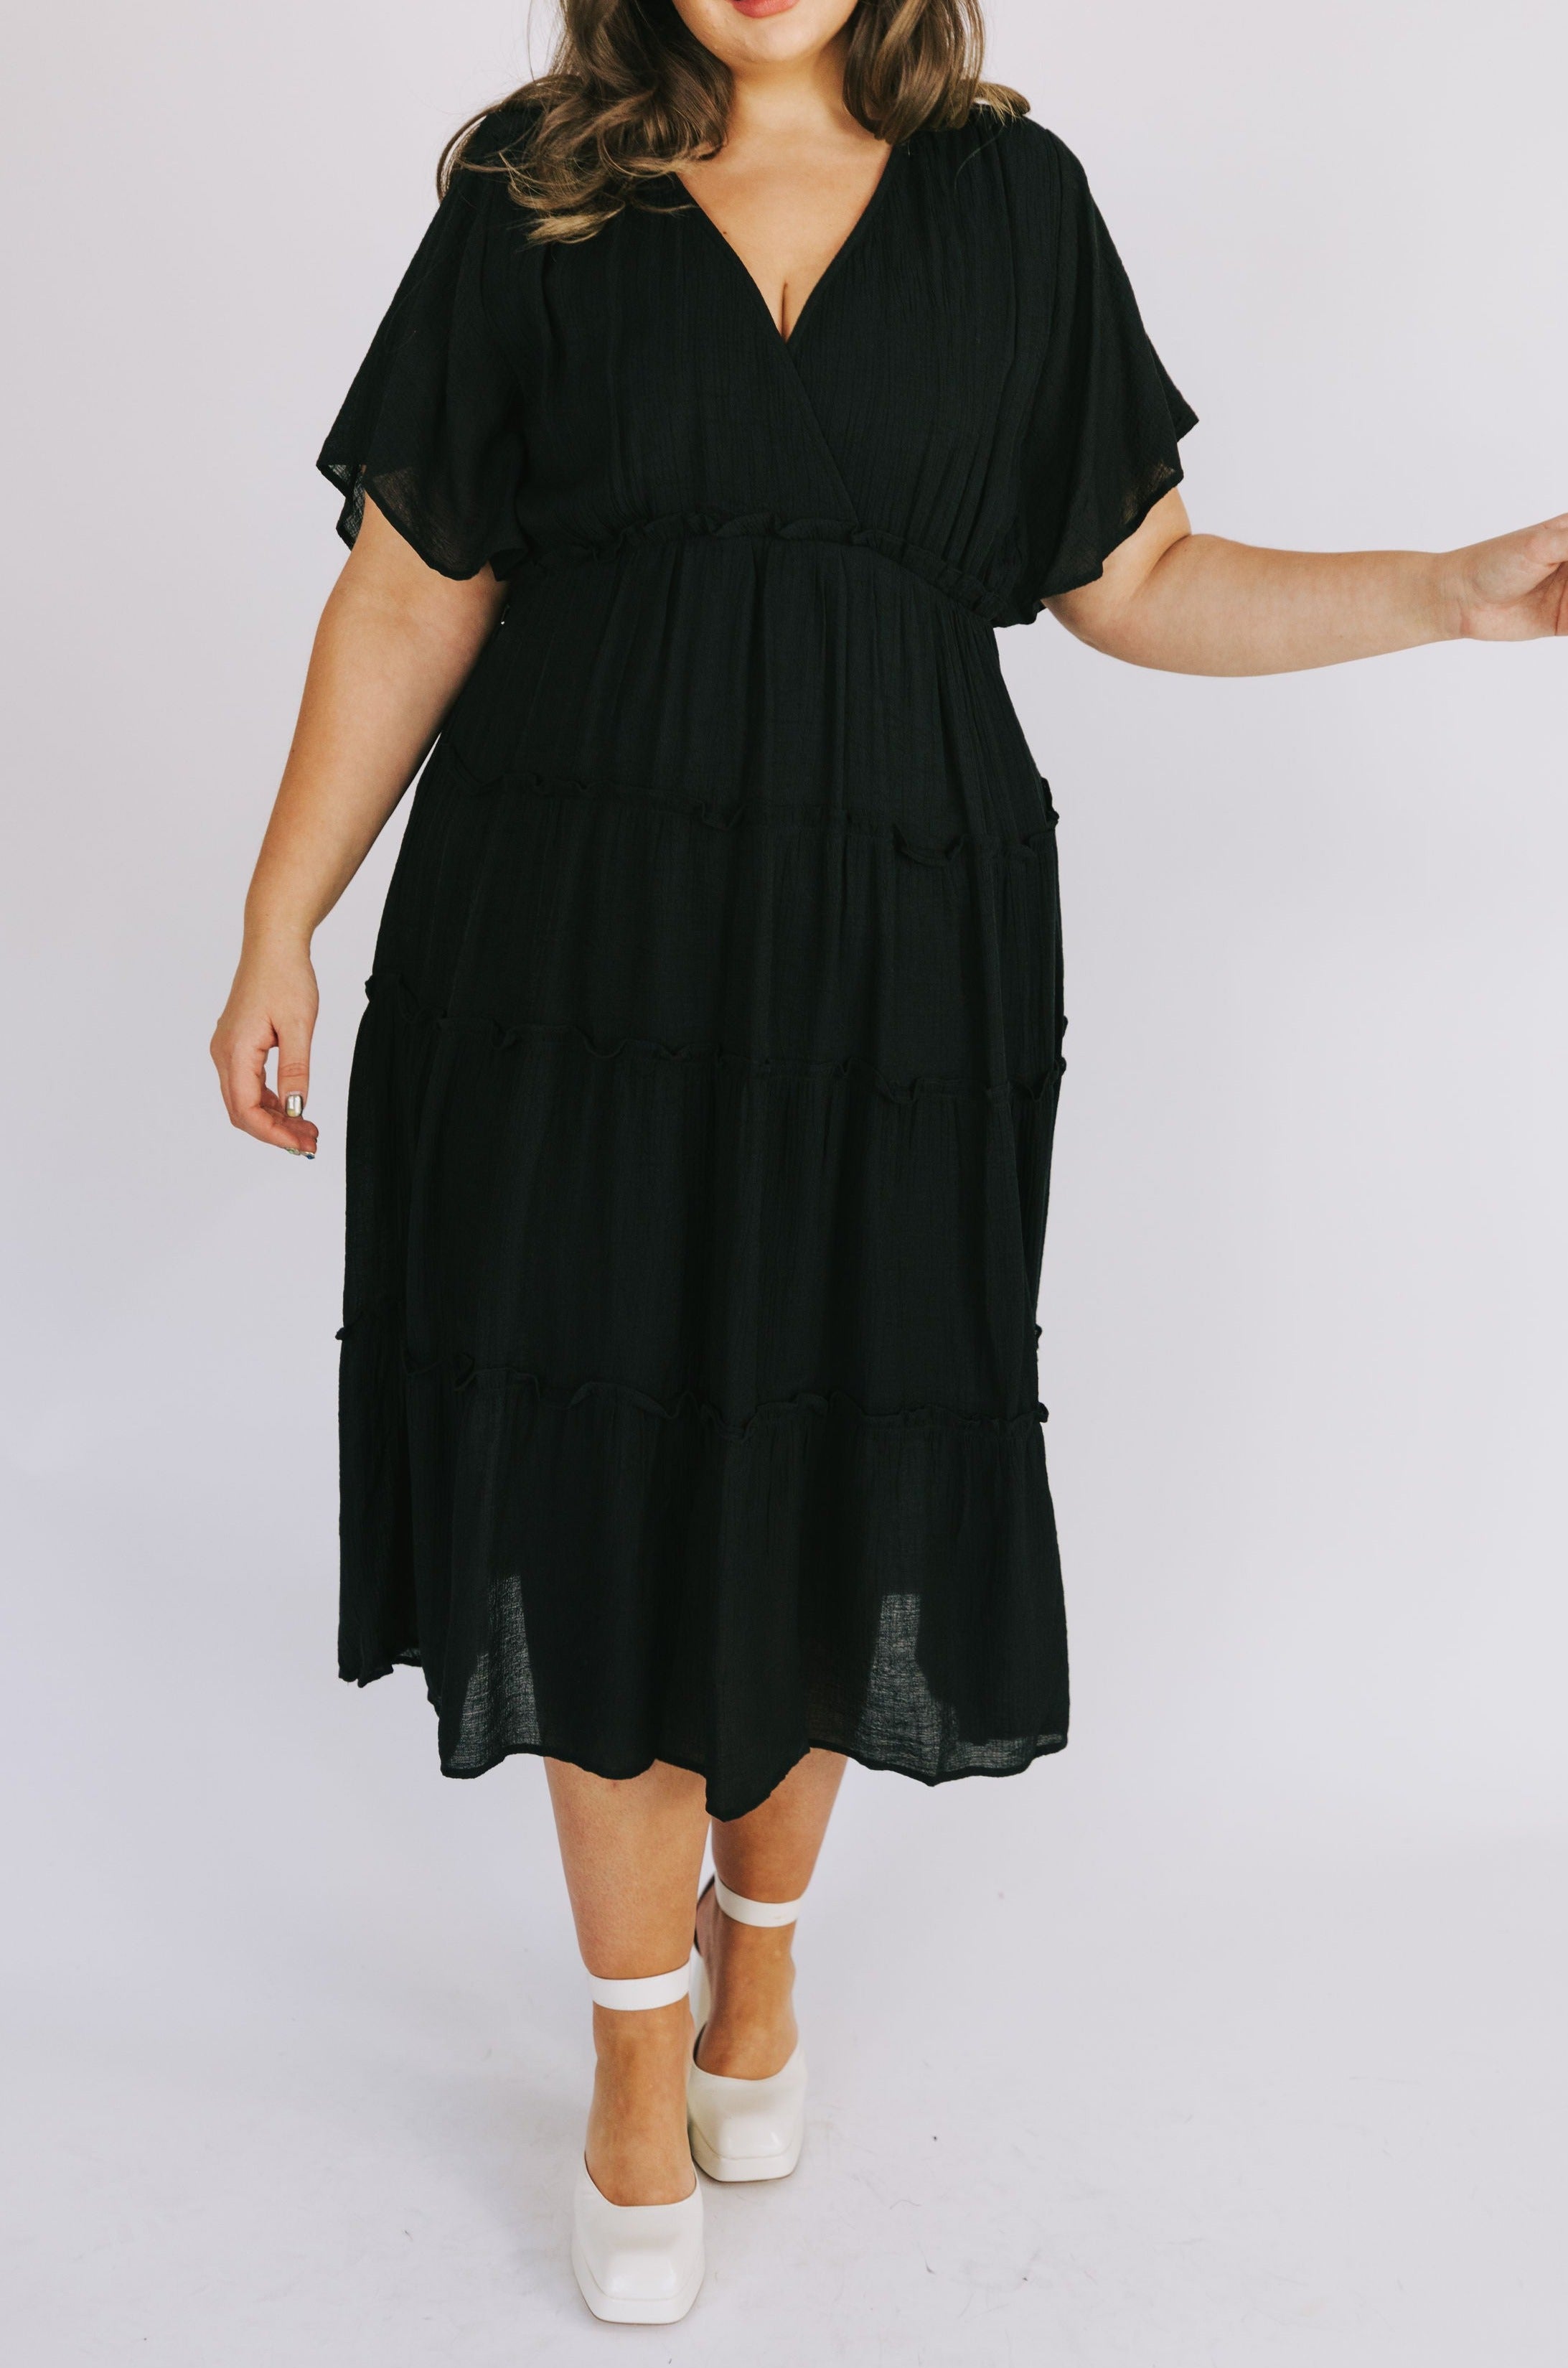 PLUS SIZE - Speed Of Sound Dress - 2 Colors!